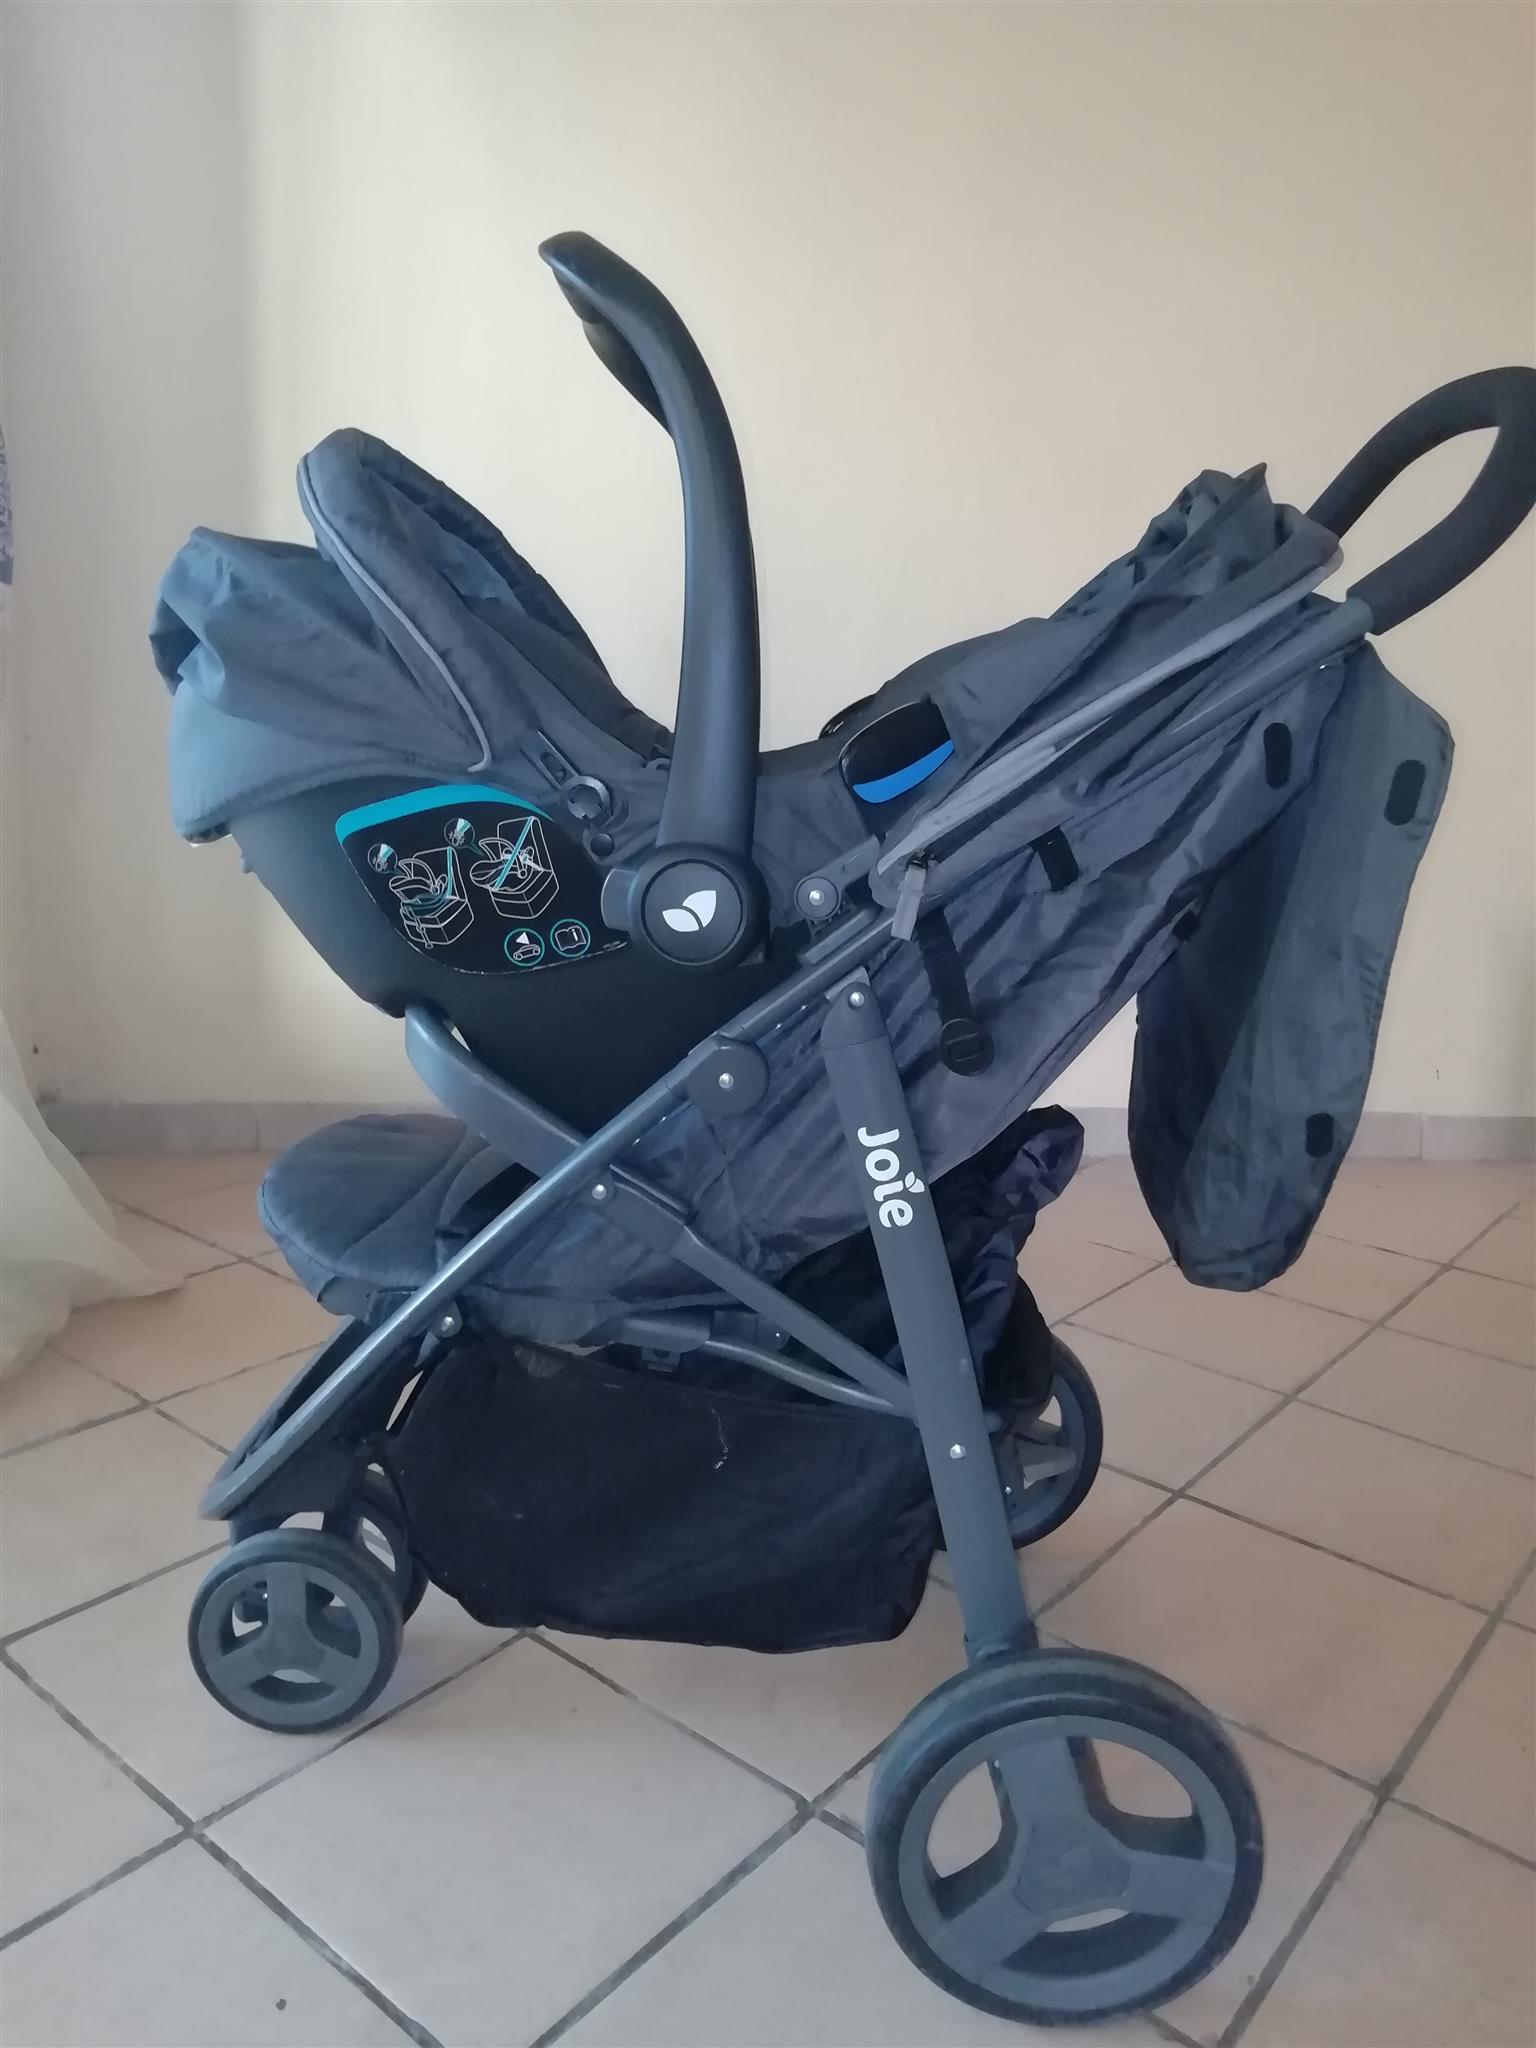 second hand stroller for sale